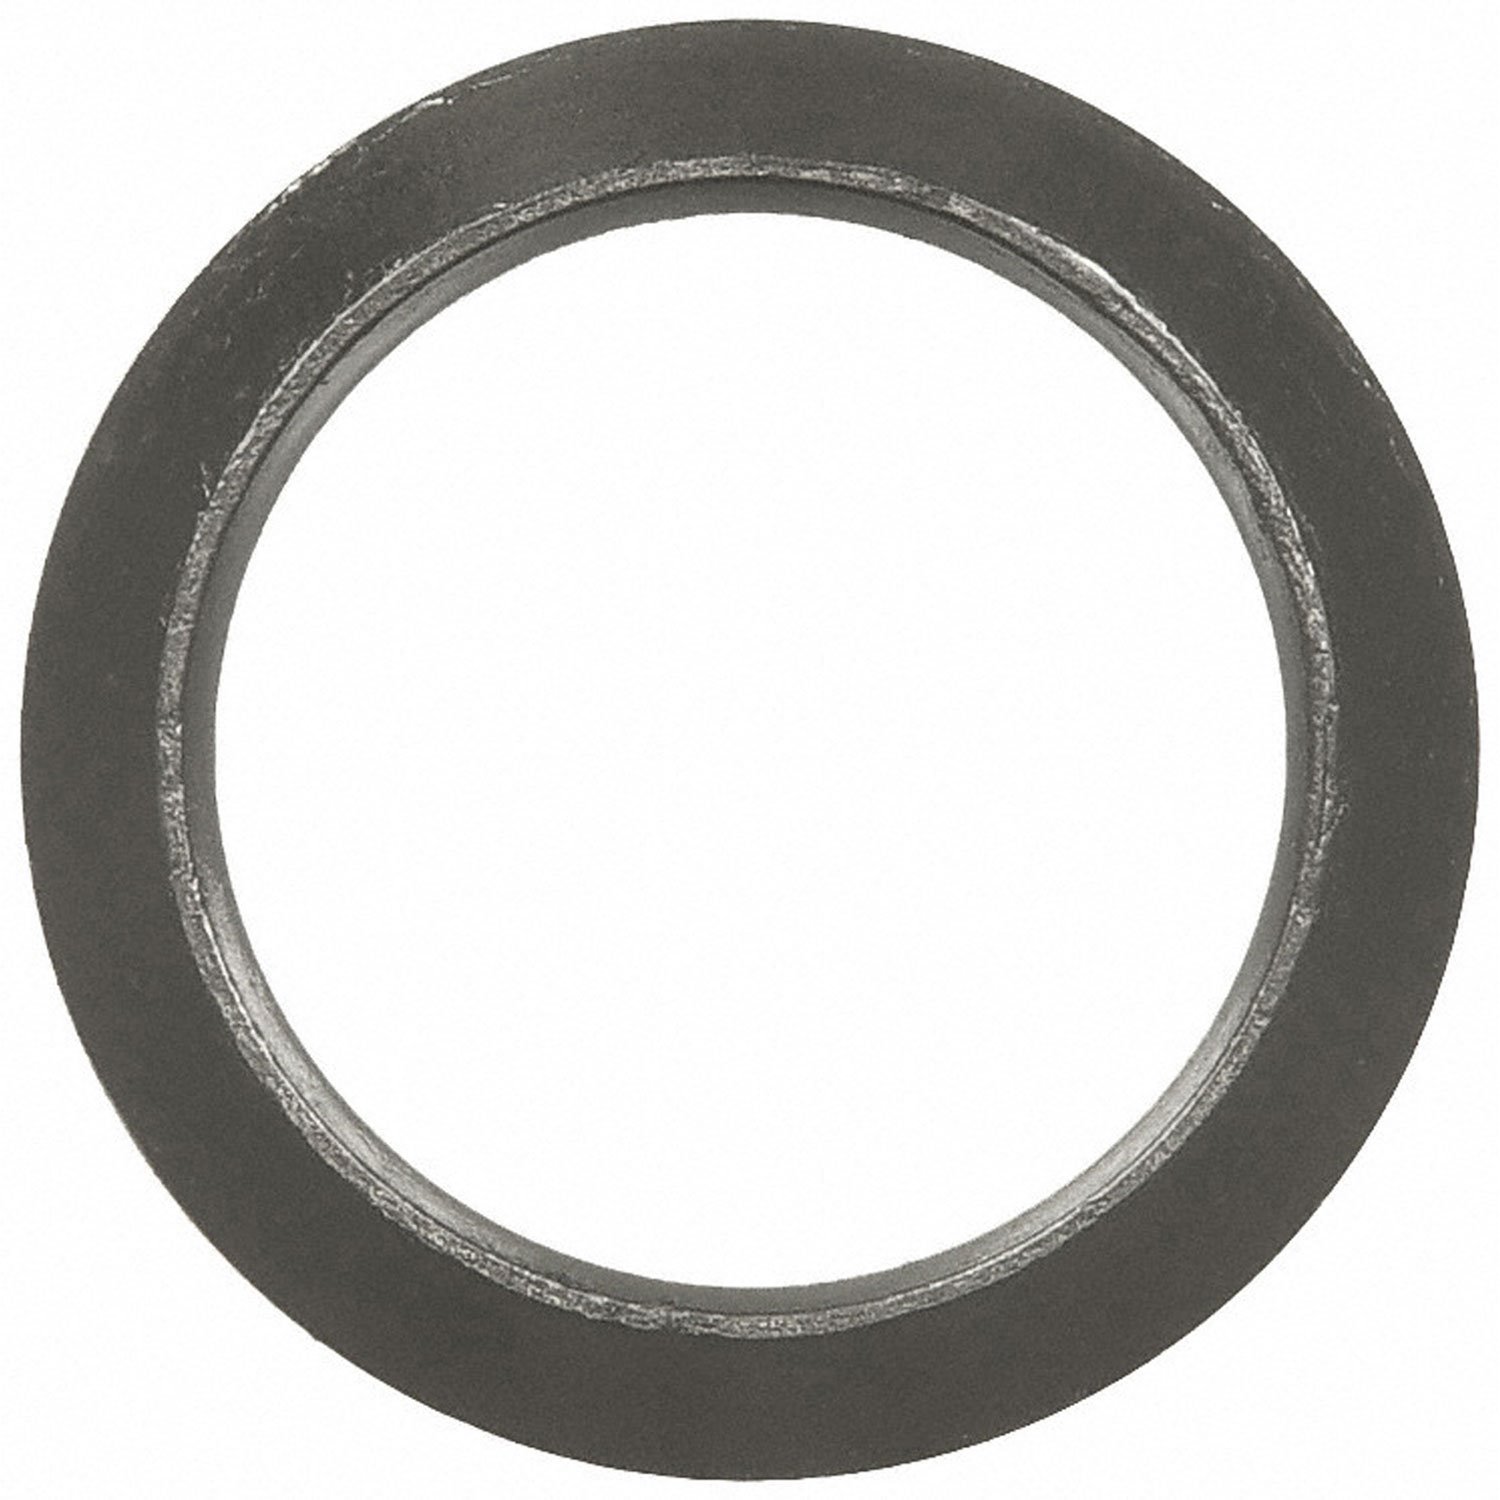 EXHAUST PIPE GASKET 2004-1995 GM V6 231CI 3.8L Buick 2004-1996 GM V6 231CI 3.8L Supercharged